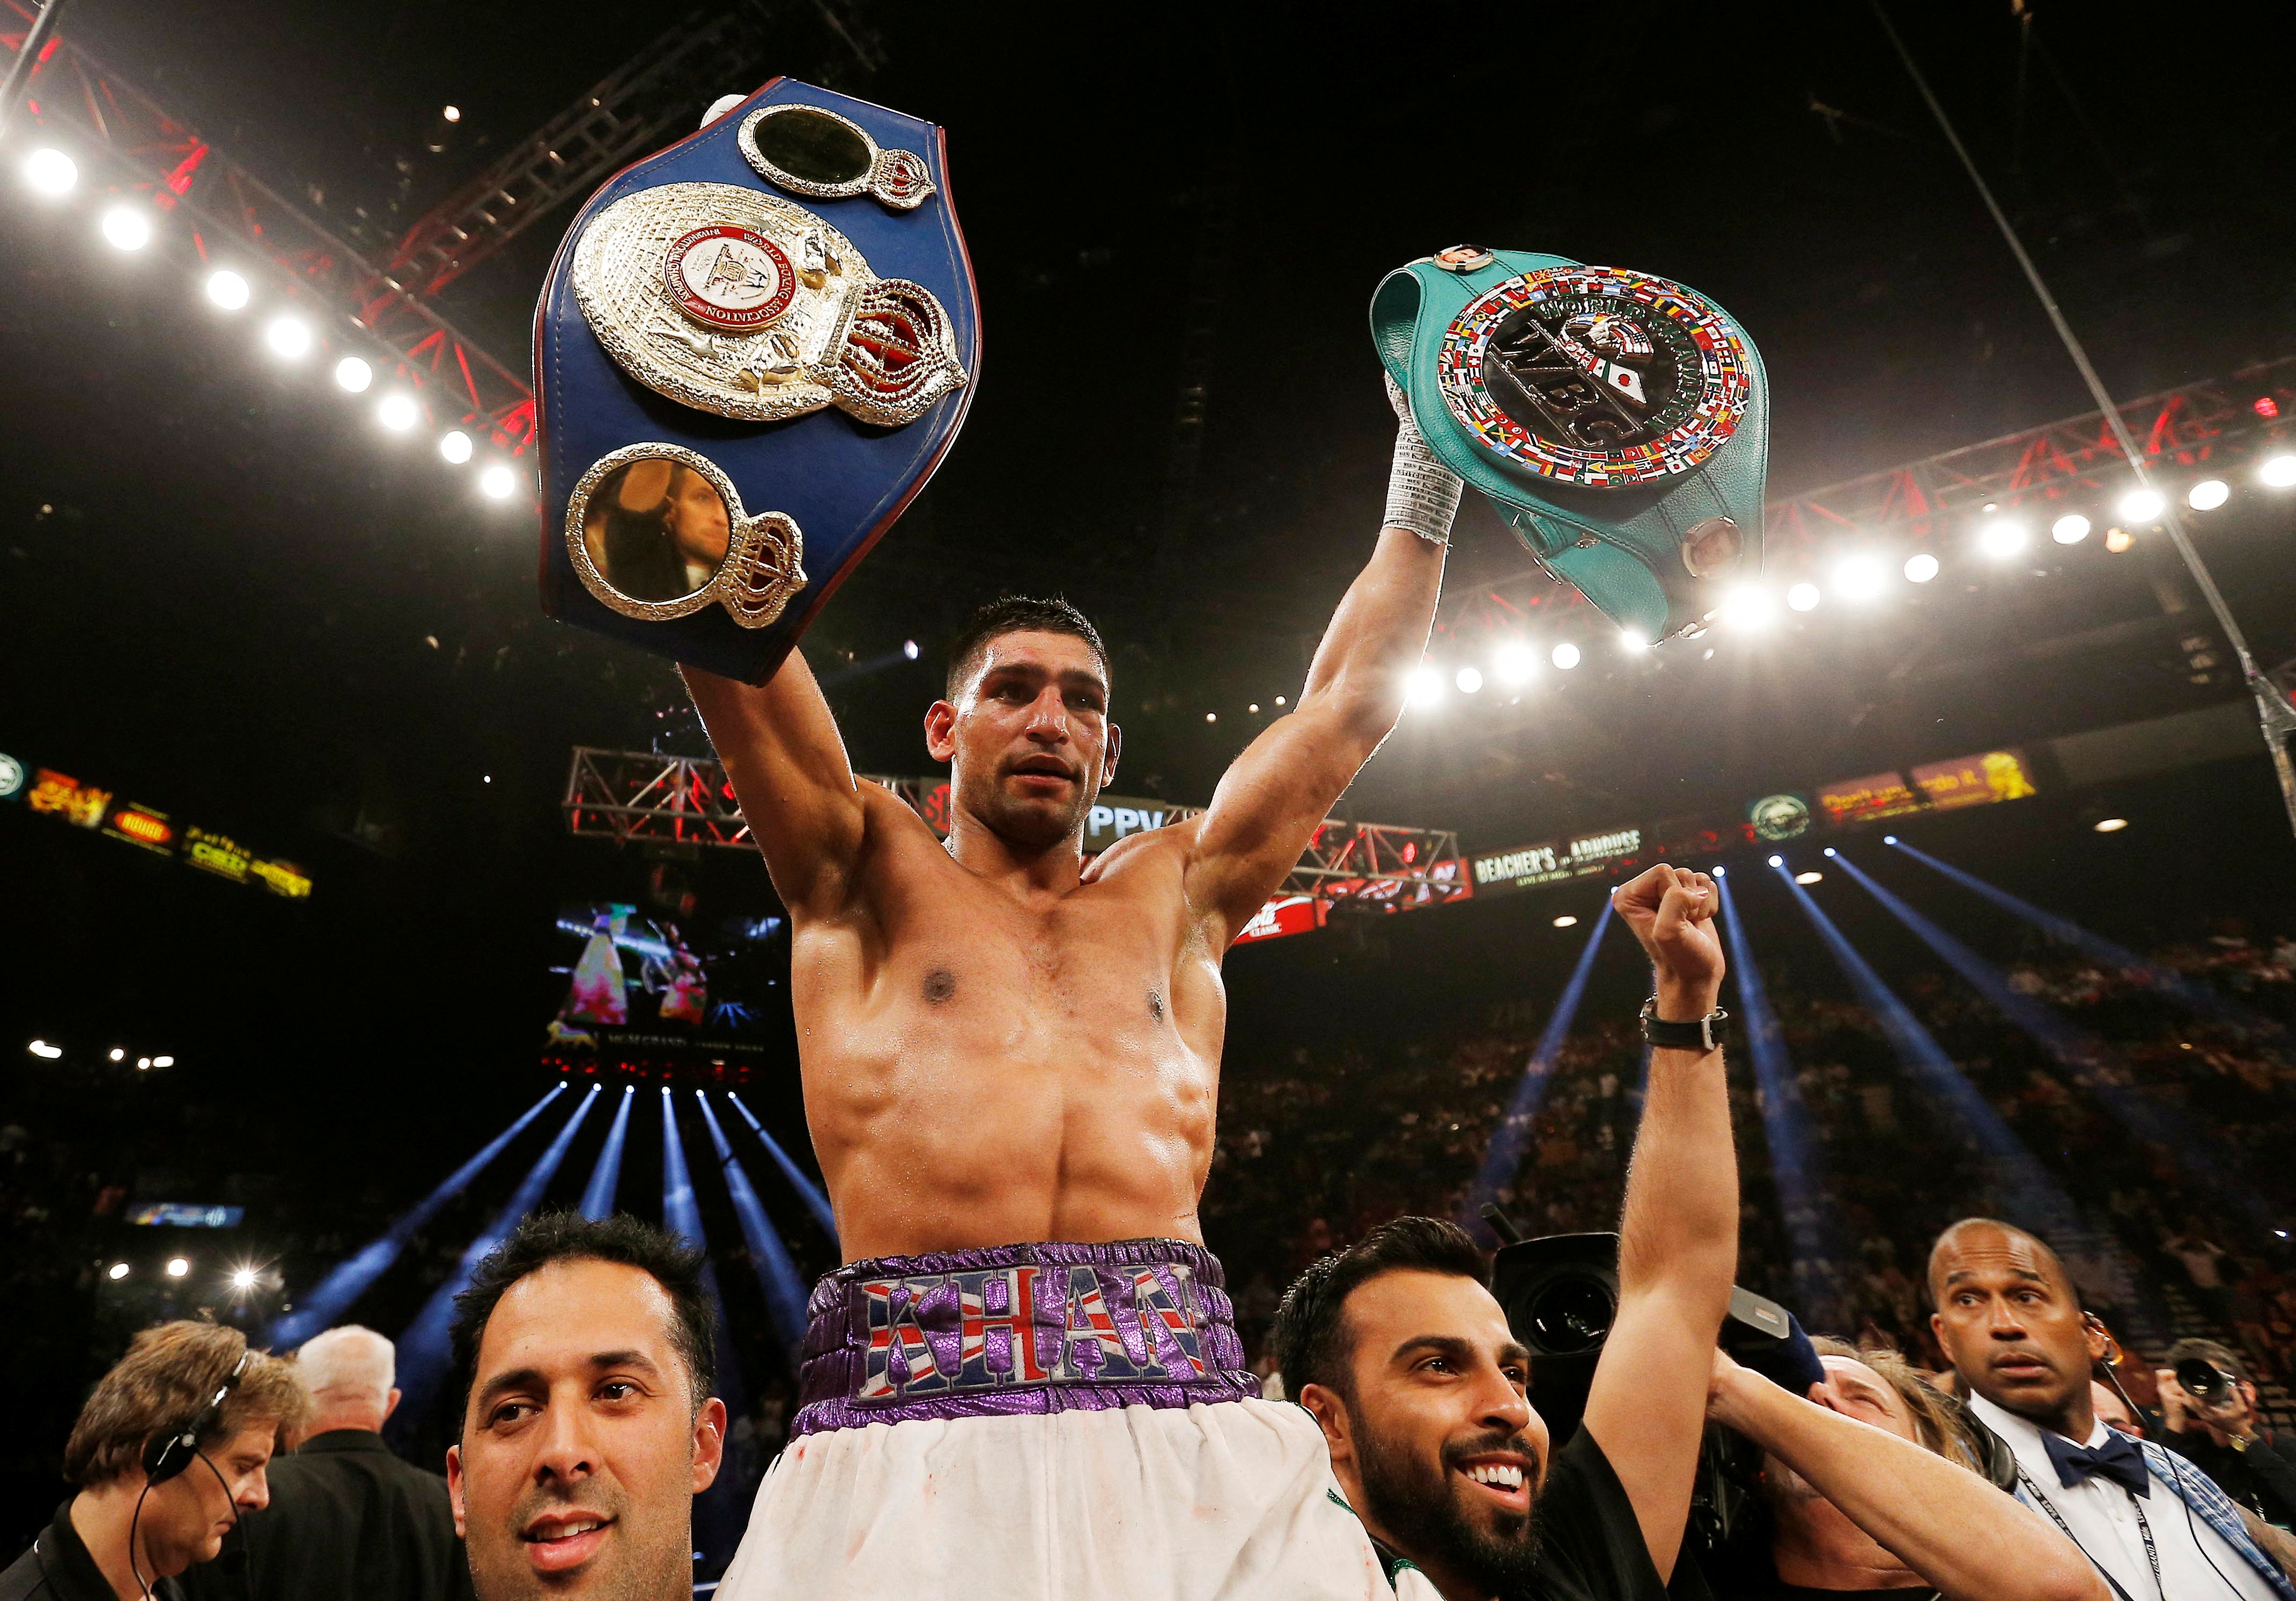 FILE PHOTO: Boxing - Luis Collazo v Amir Khan WBA International Welterweight Title - MGM Grand Garden Arena, Las Vegas, United States of America - 3/5/14   Amir Khan celebrates winning the fight with the title belts   Action Images via Reuters/Andrew Couldridge/File Photo